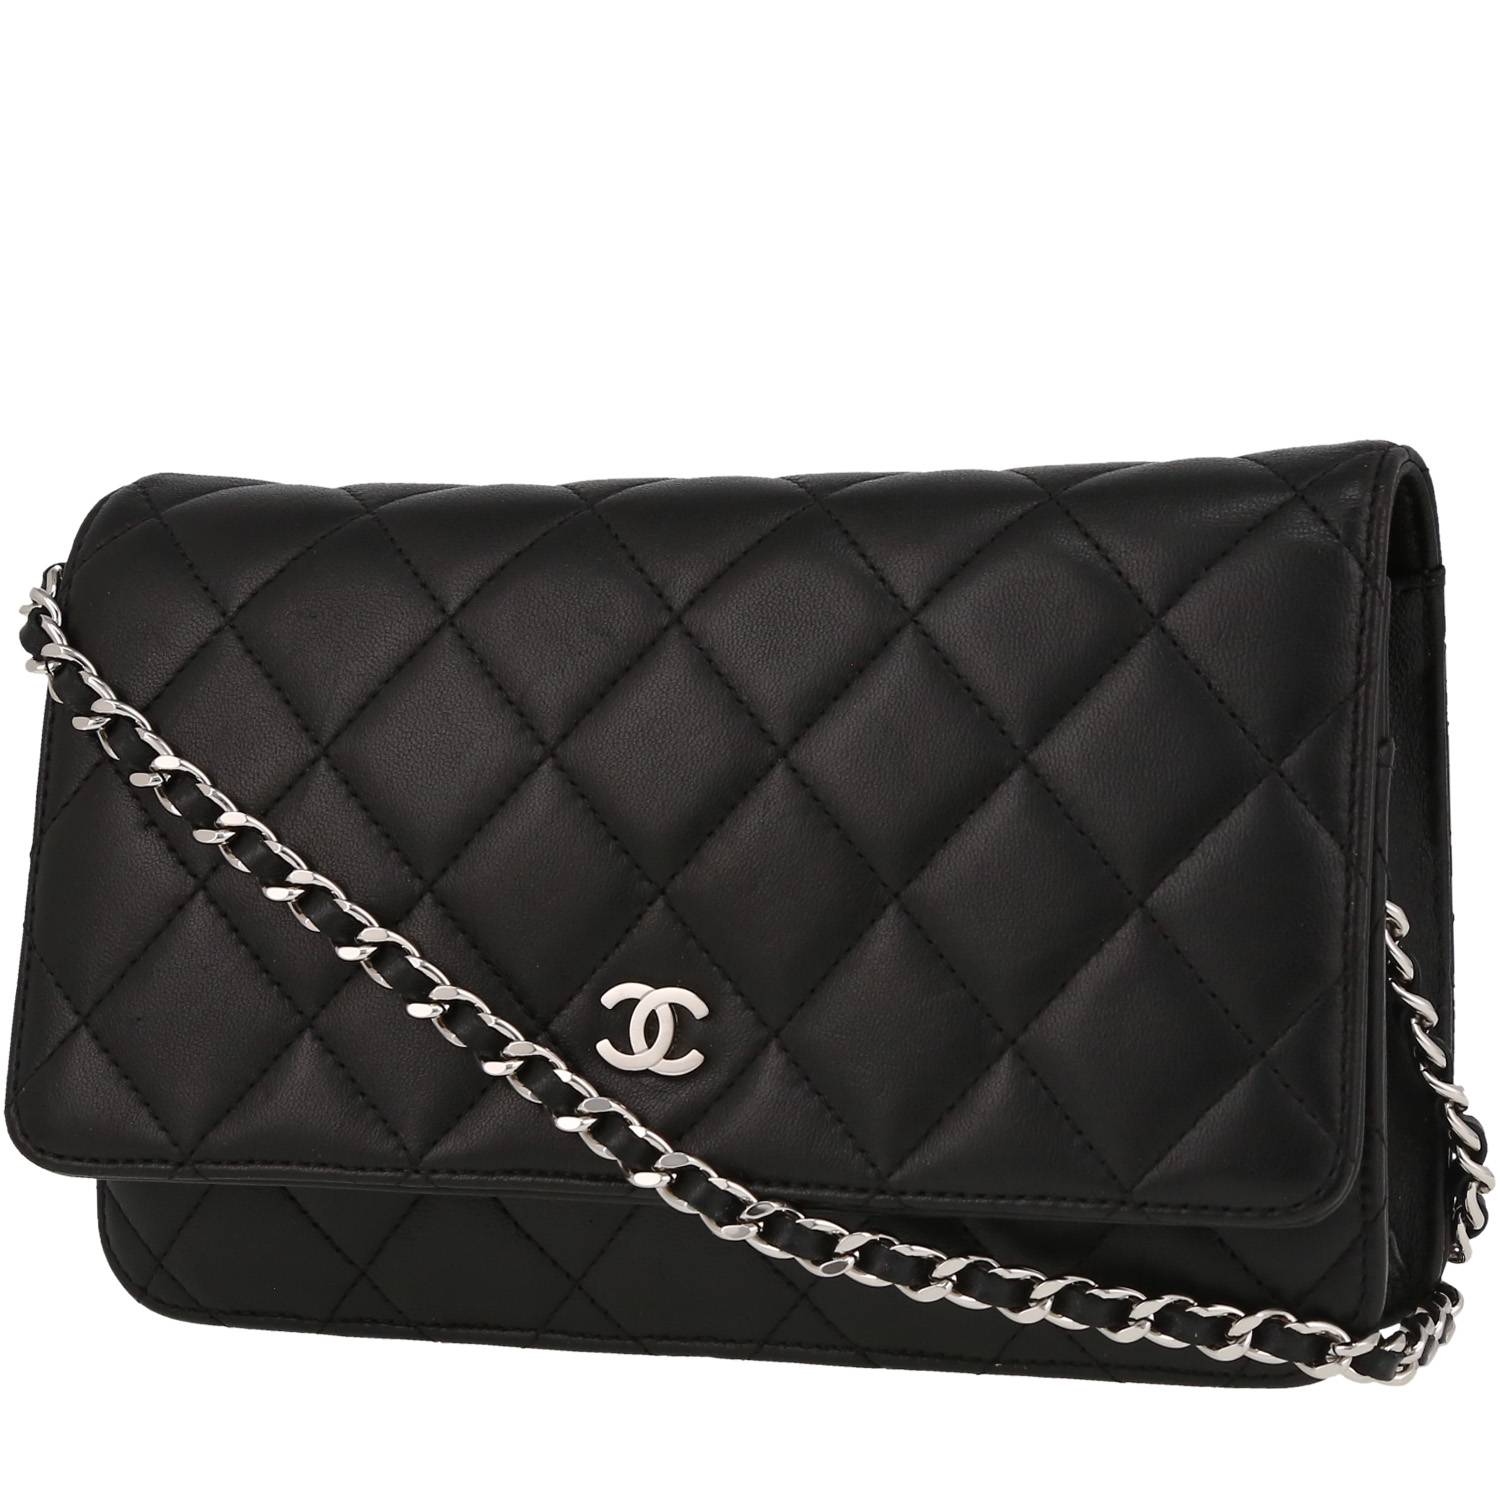 Chanel Wallet on Chain shoulder bag in black quilted leather